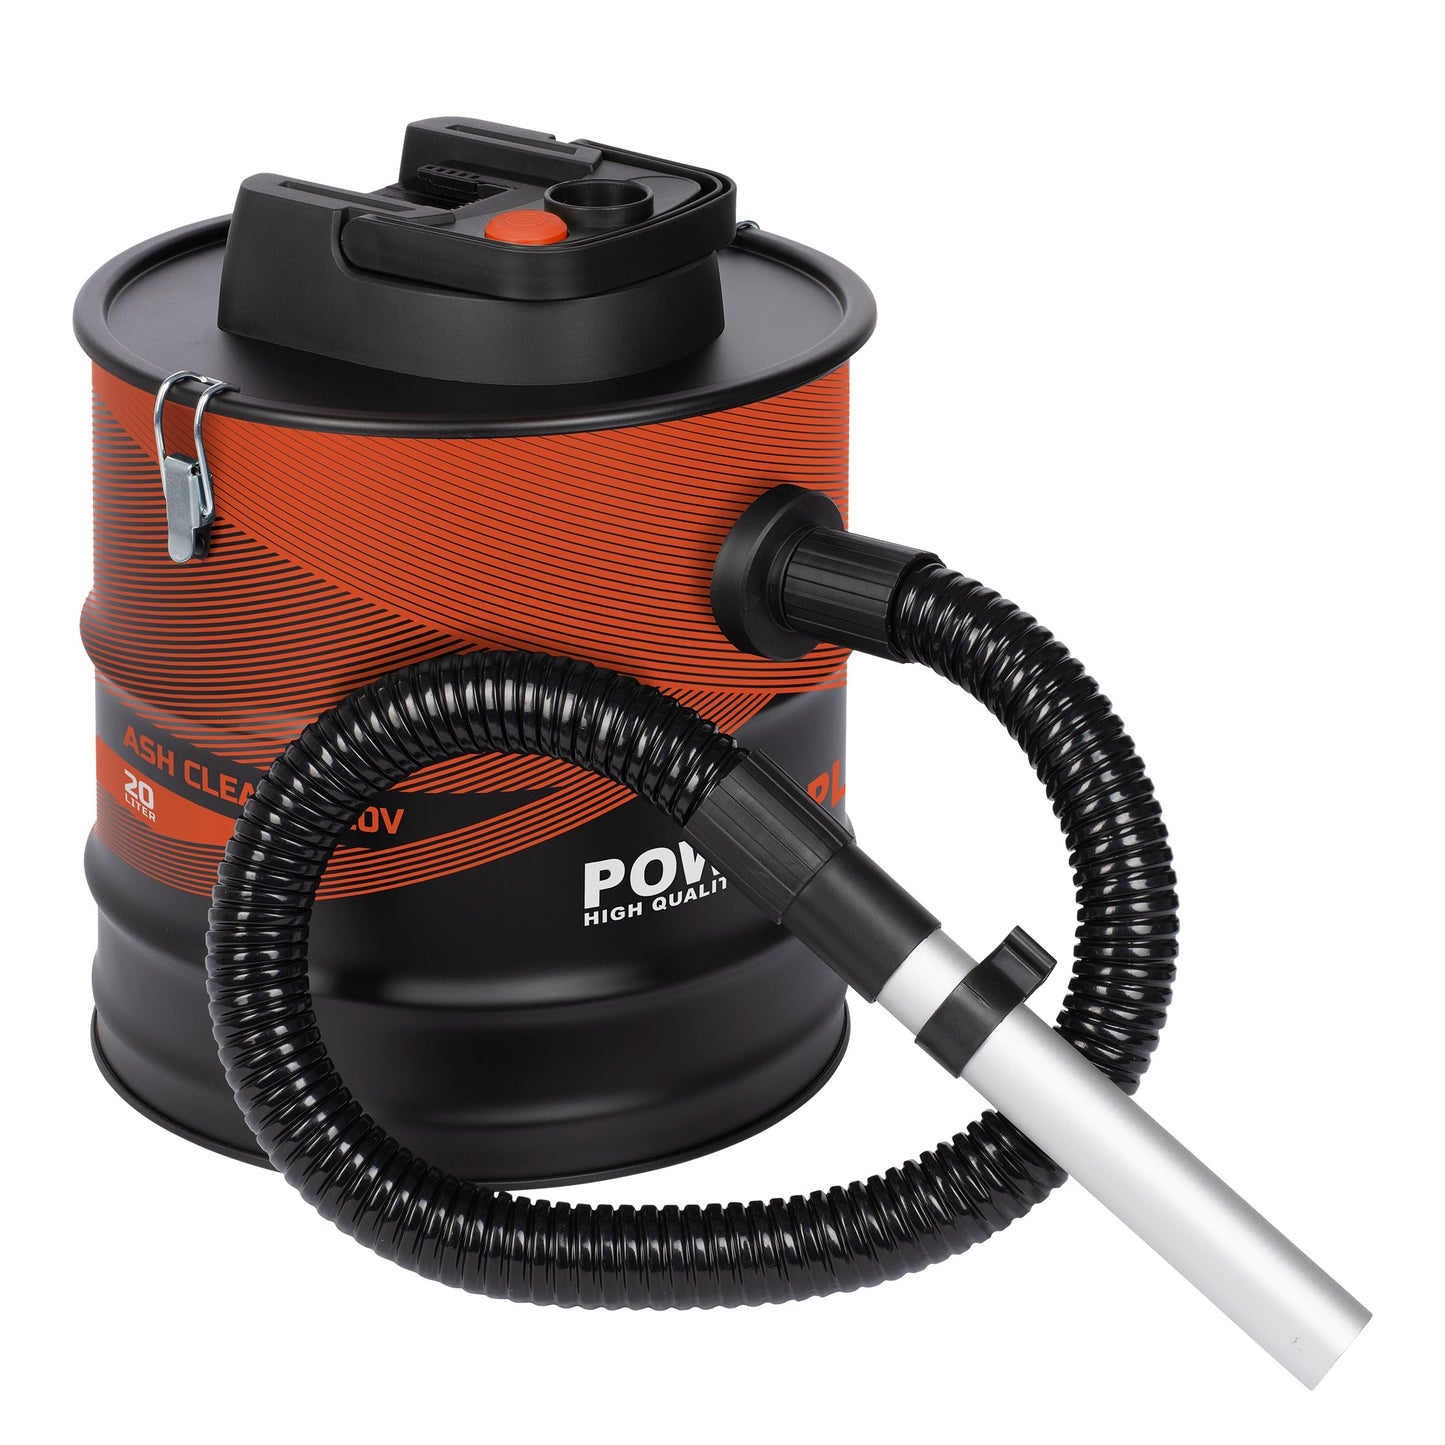 Dual Power - 20V Cordless Ash Cleaner - 20L (unit only)